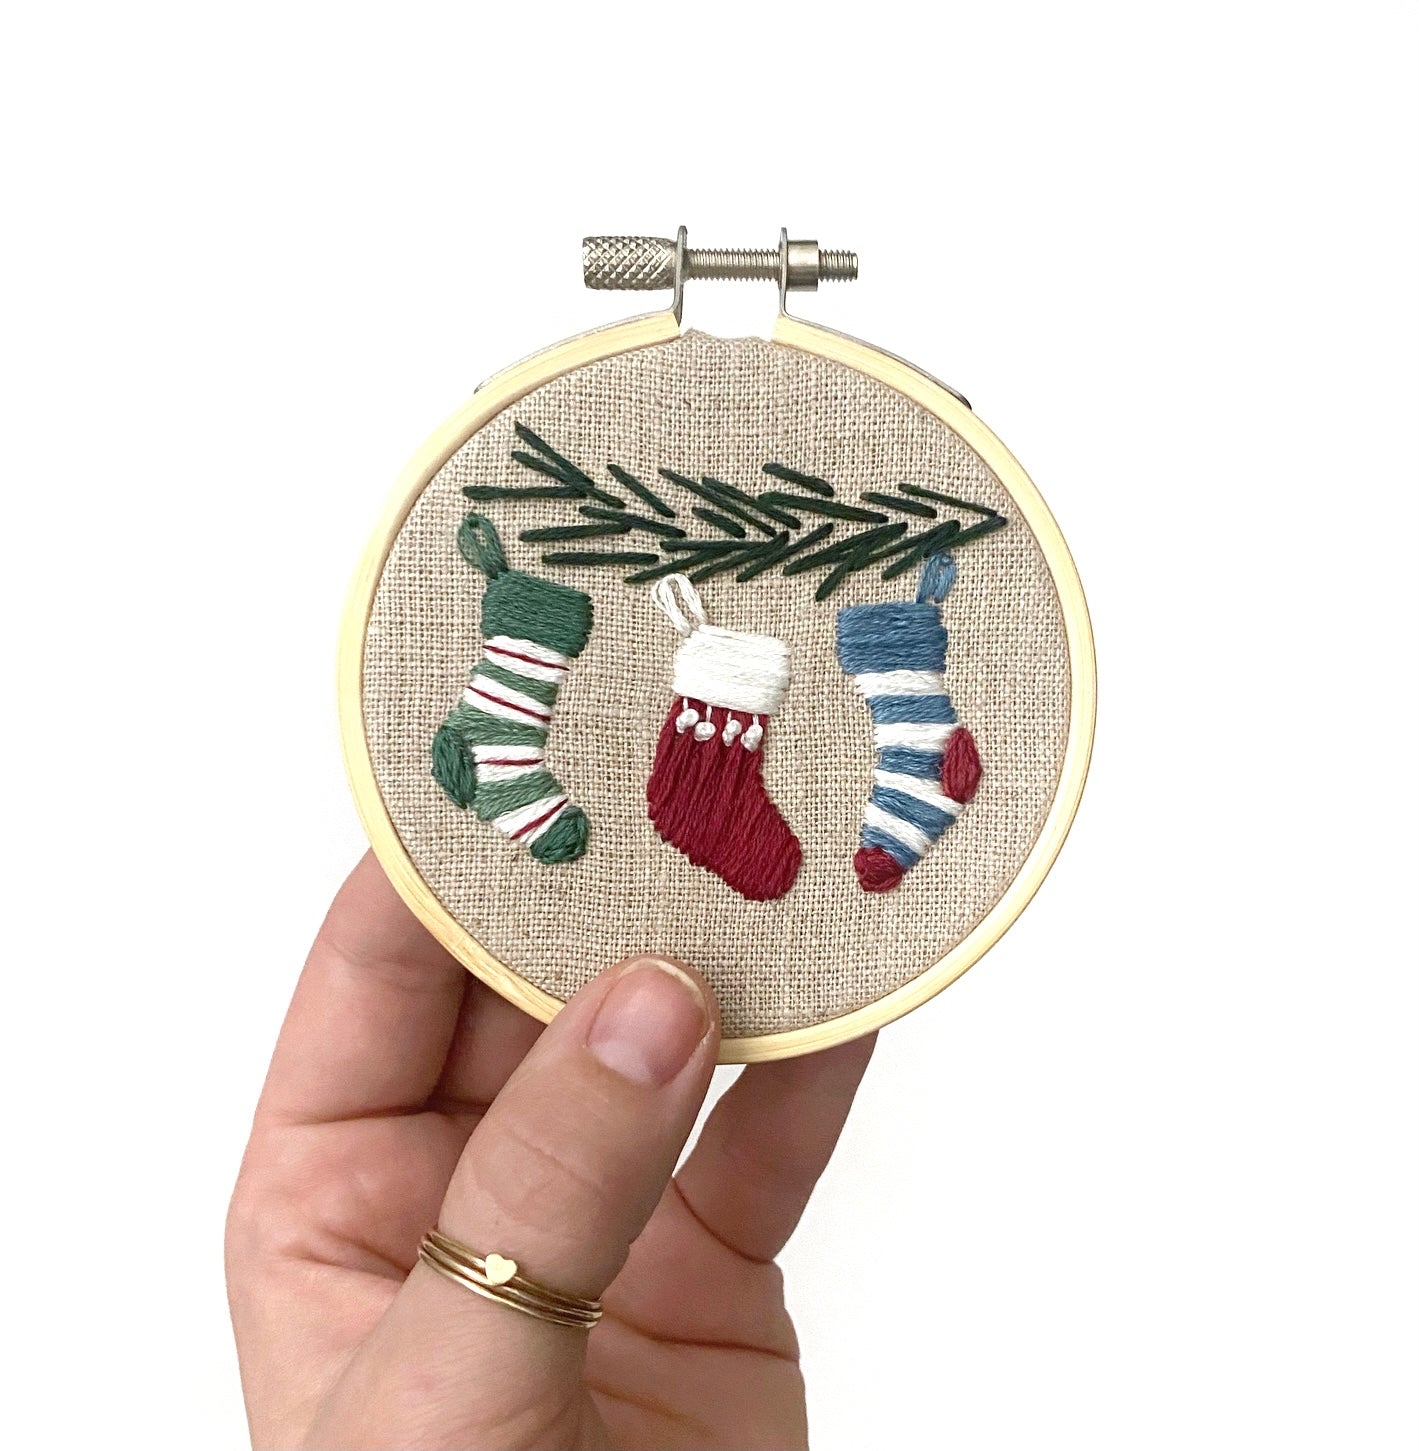 12 Christmas Ornaments PDF Embroidery Pattern